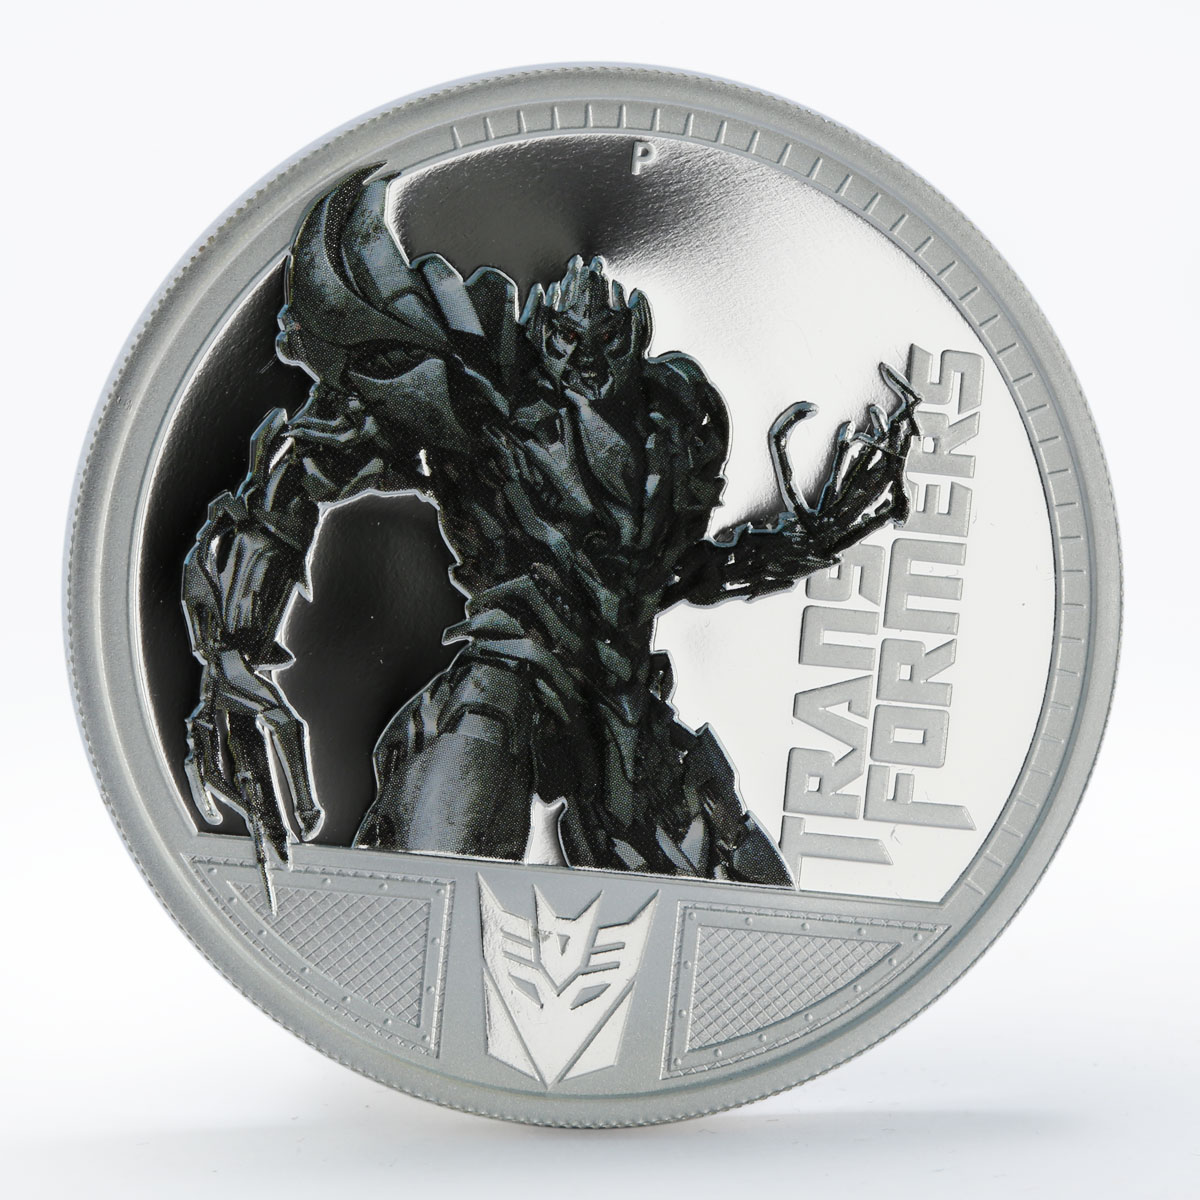 Tuvalu 1 dollar Transformers Megatron colored proof silver coin 2009